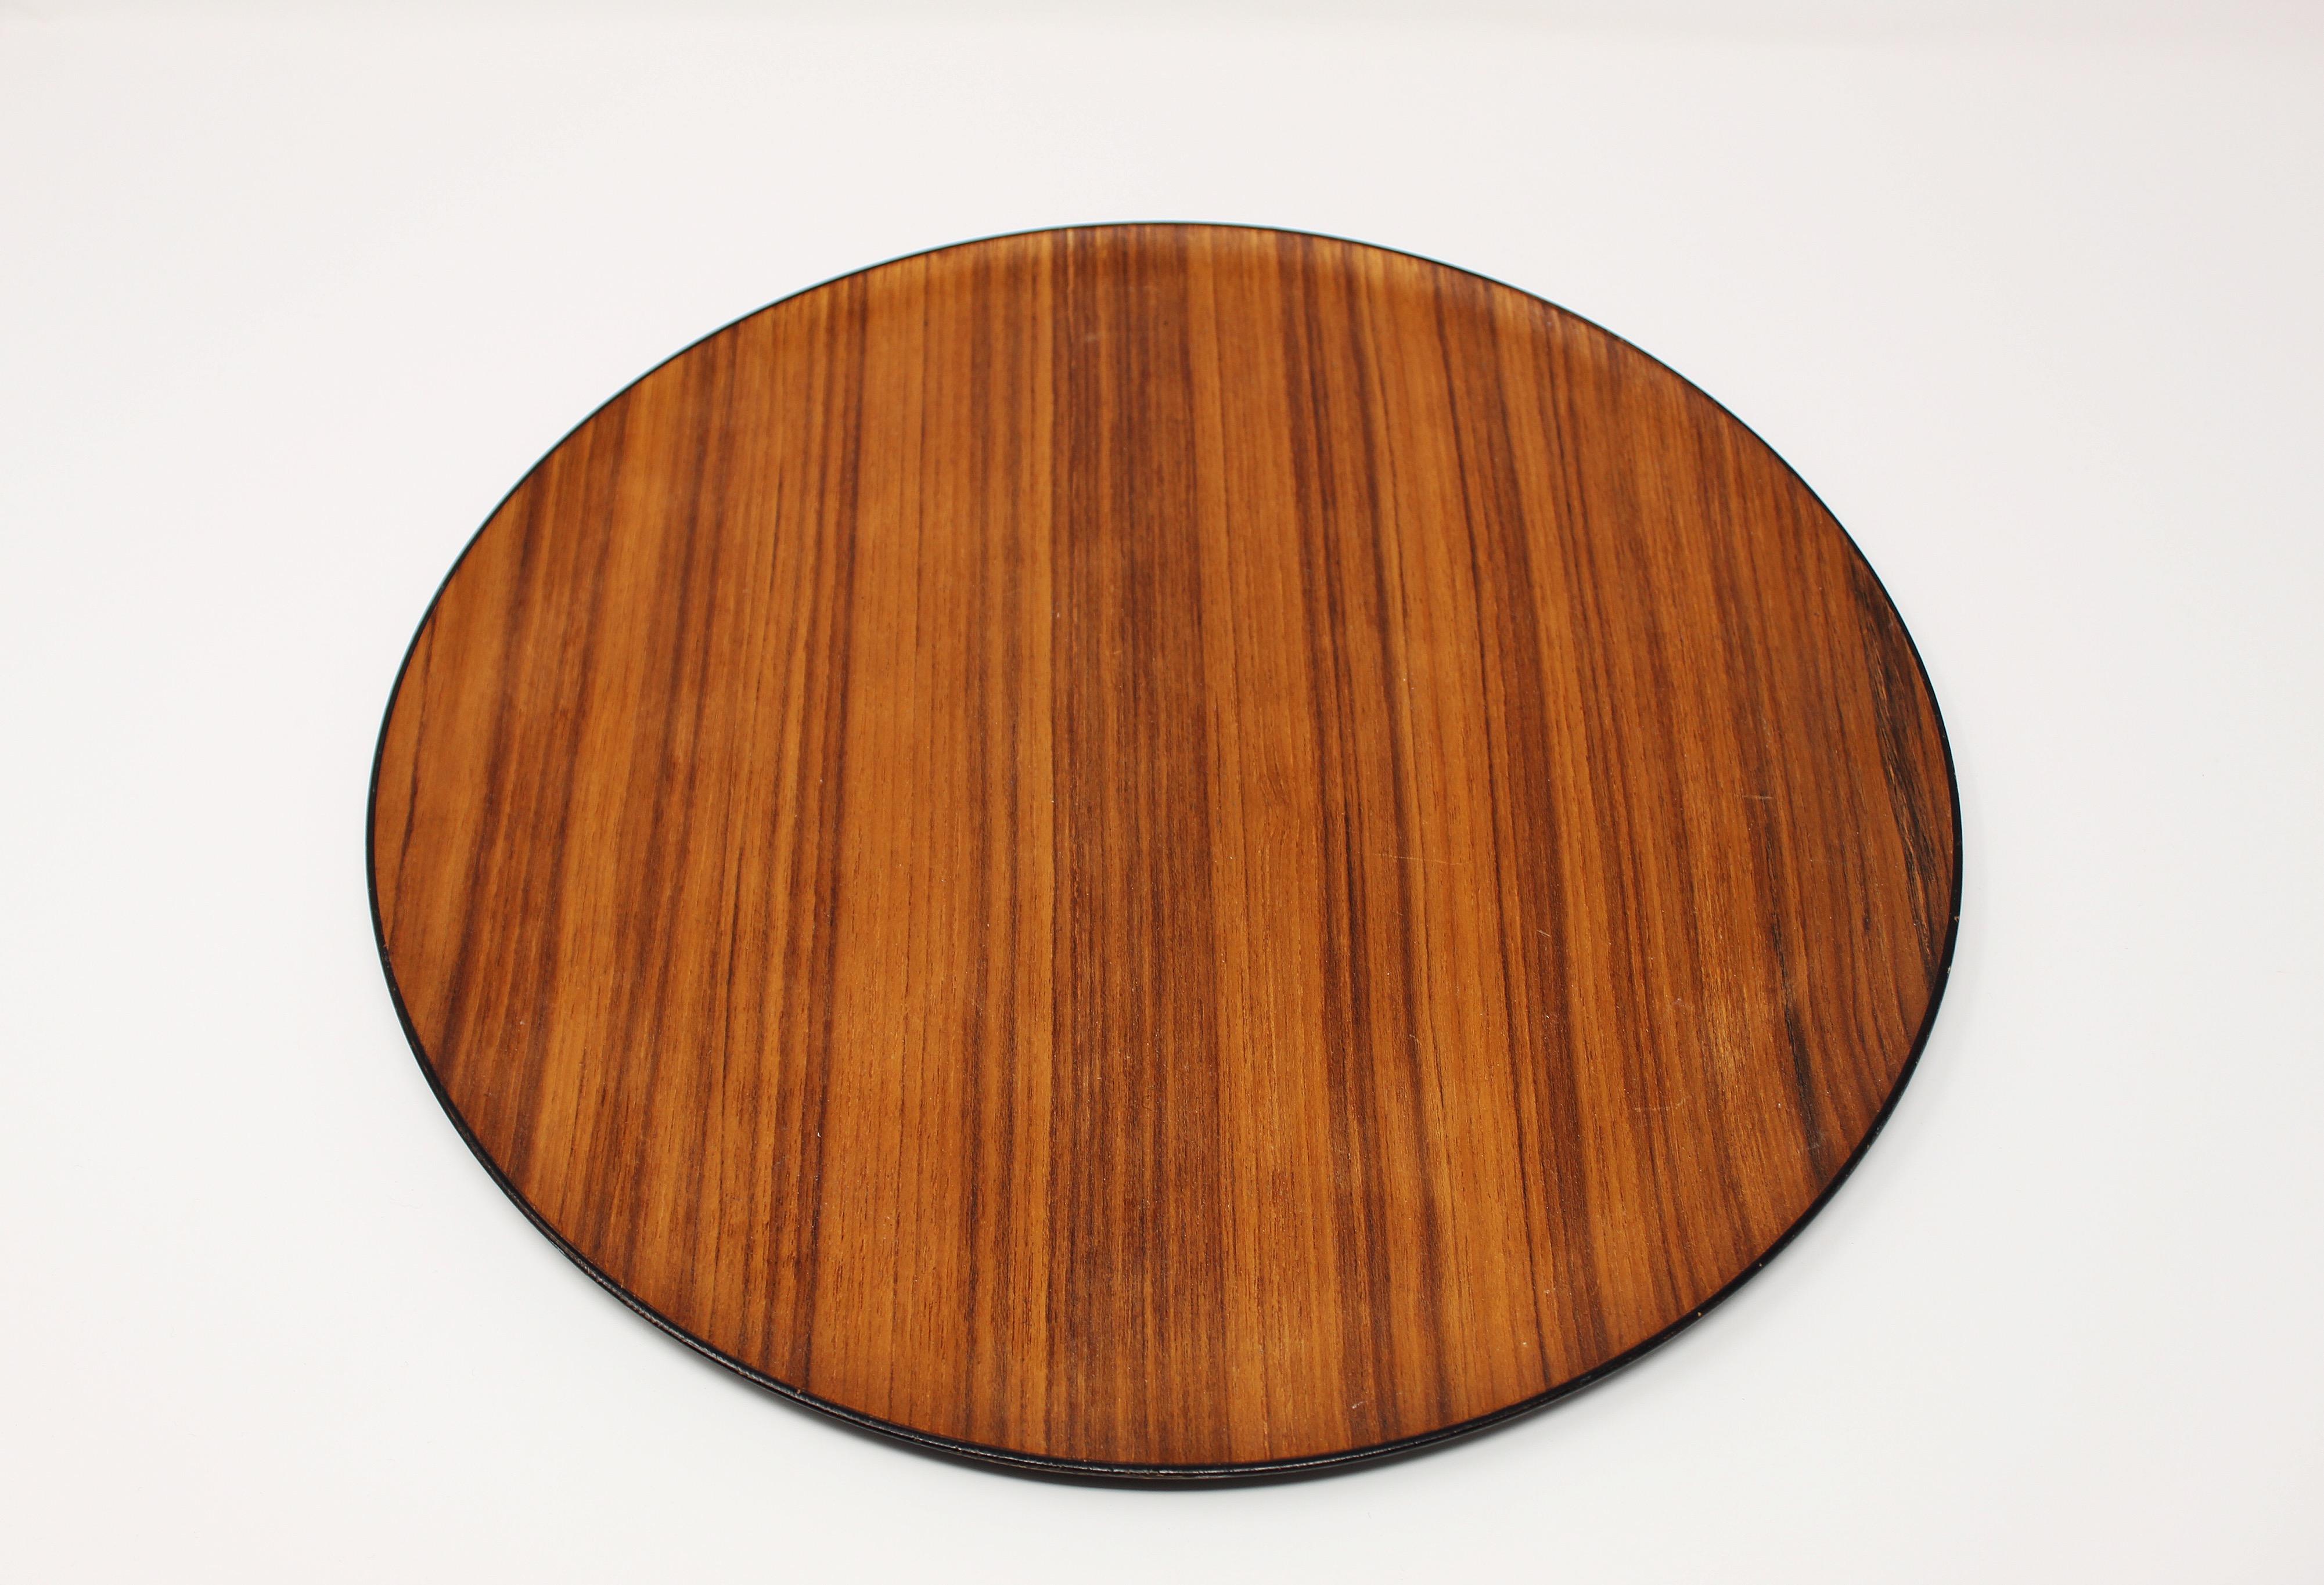 Great Mid-Century Modern, Scandinavian teak tray. The grain is lovely and has regular patina as pictured.